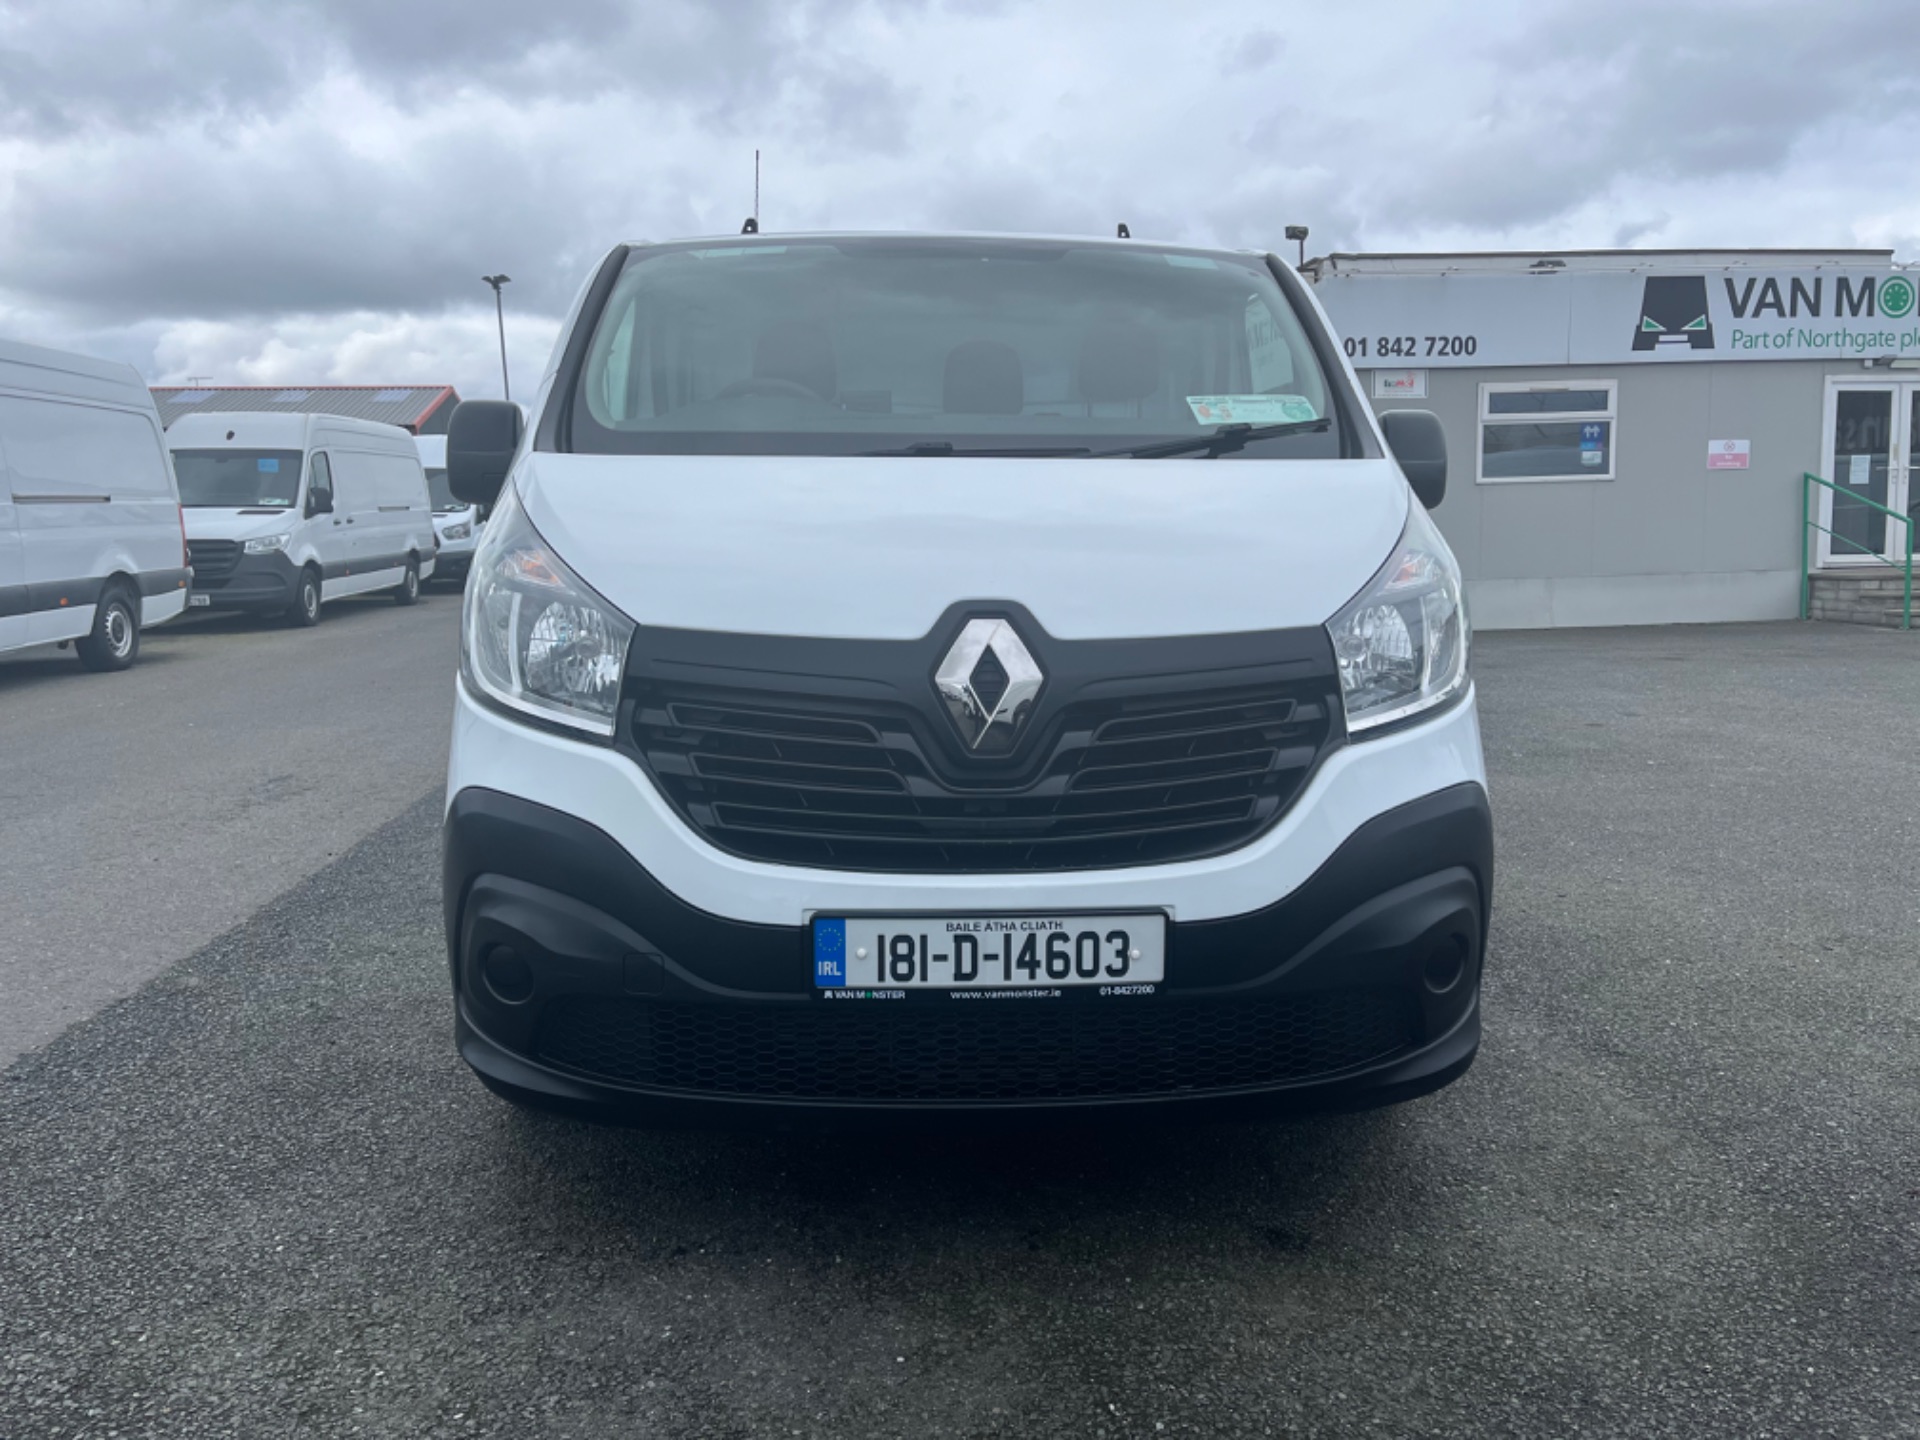 2018 Renault Trafic LL29 DCI 120 Business 3DR (181D14603) Image 4